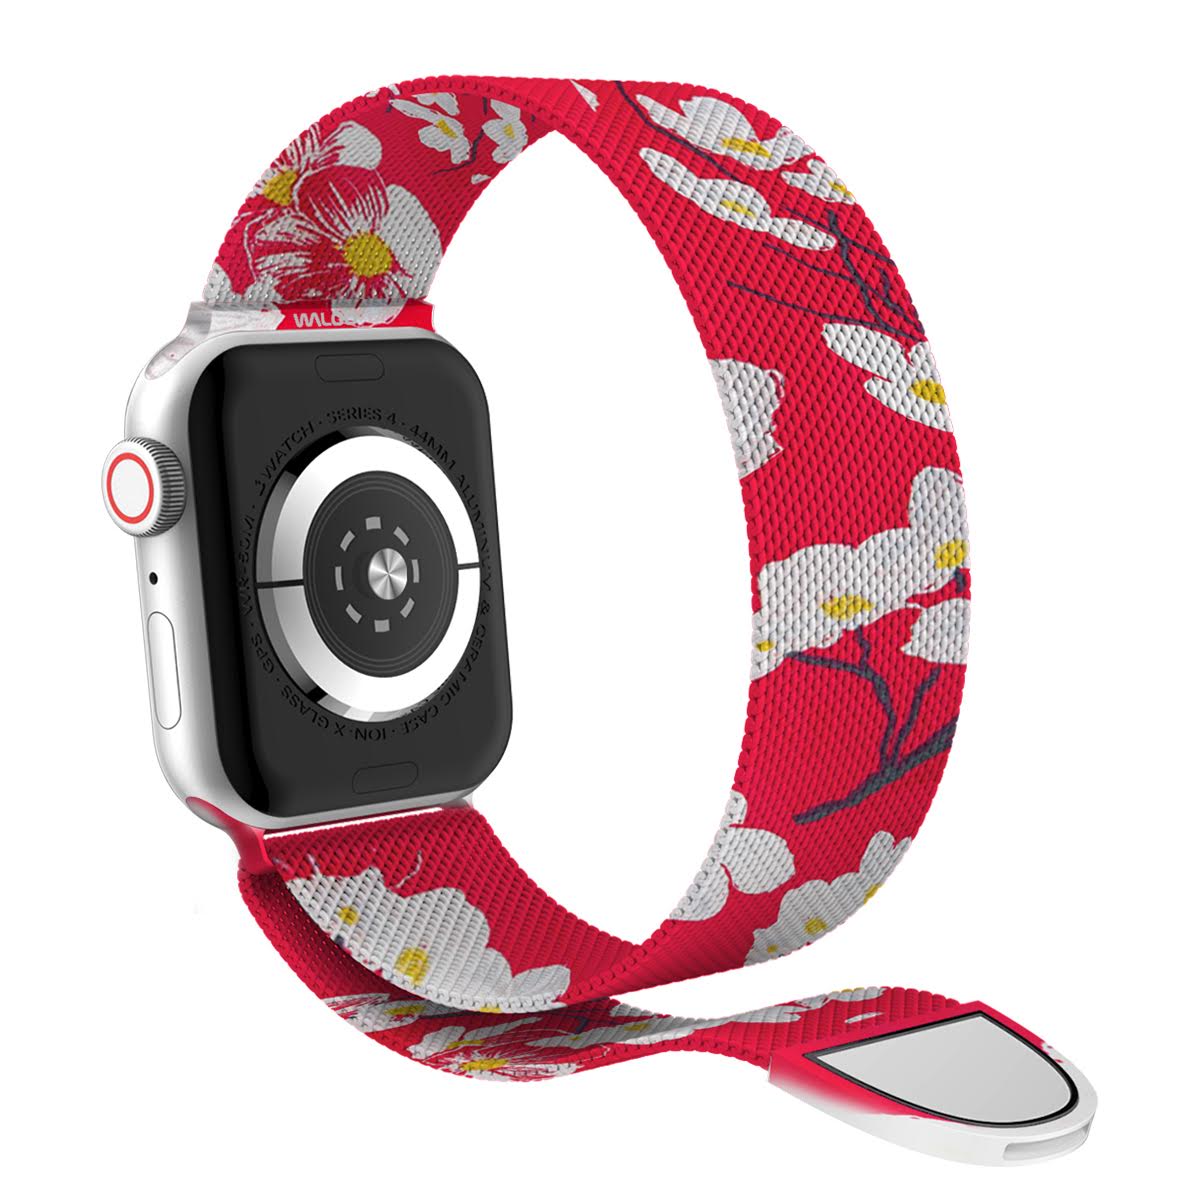 Waloo Floral Printed Magnetic Mesh Band For Apple Watch